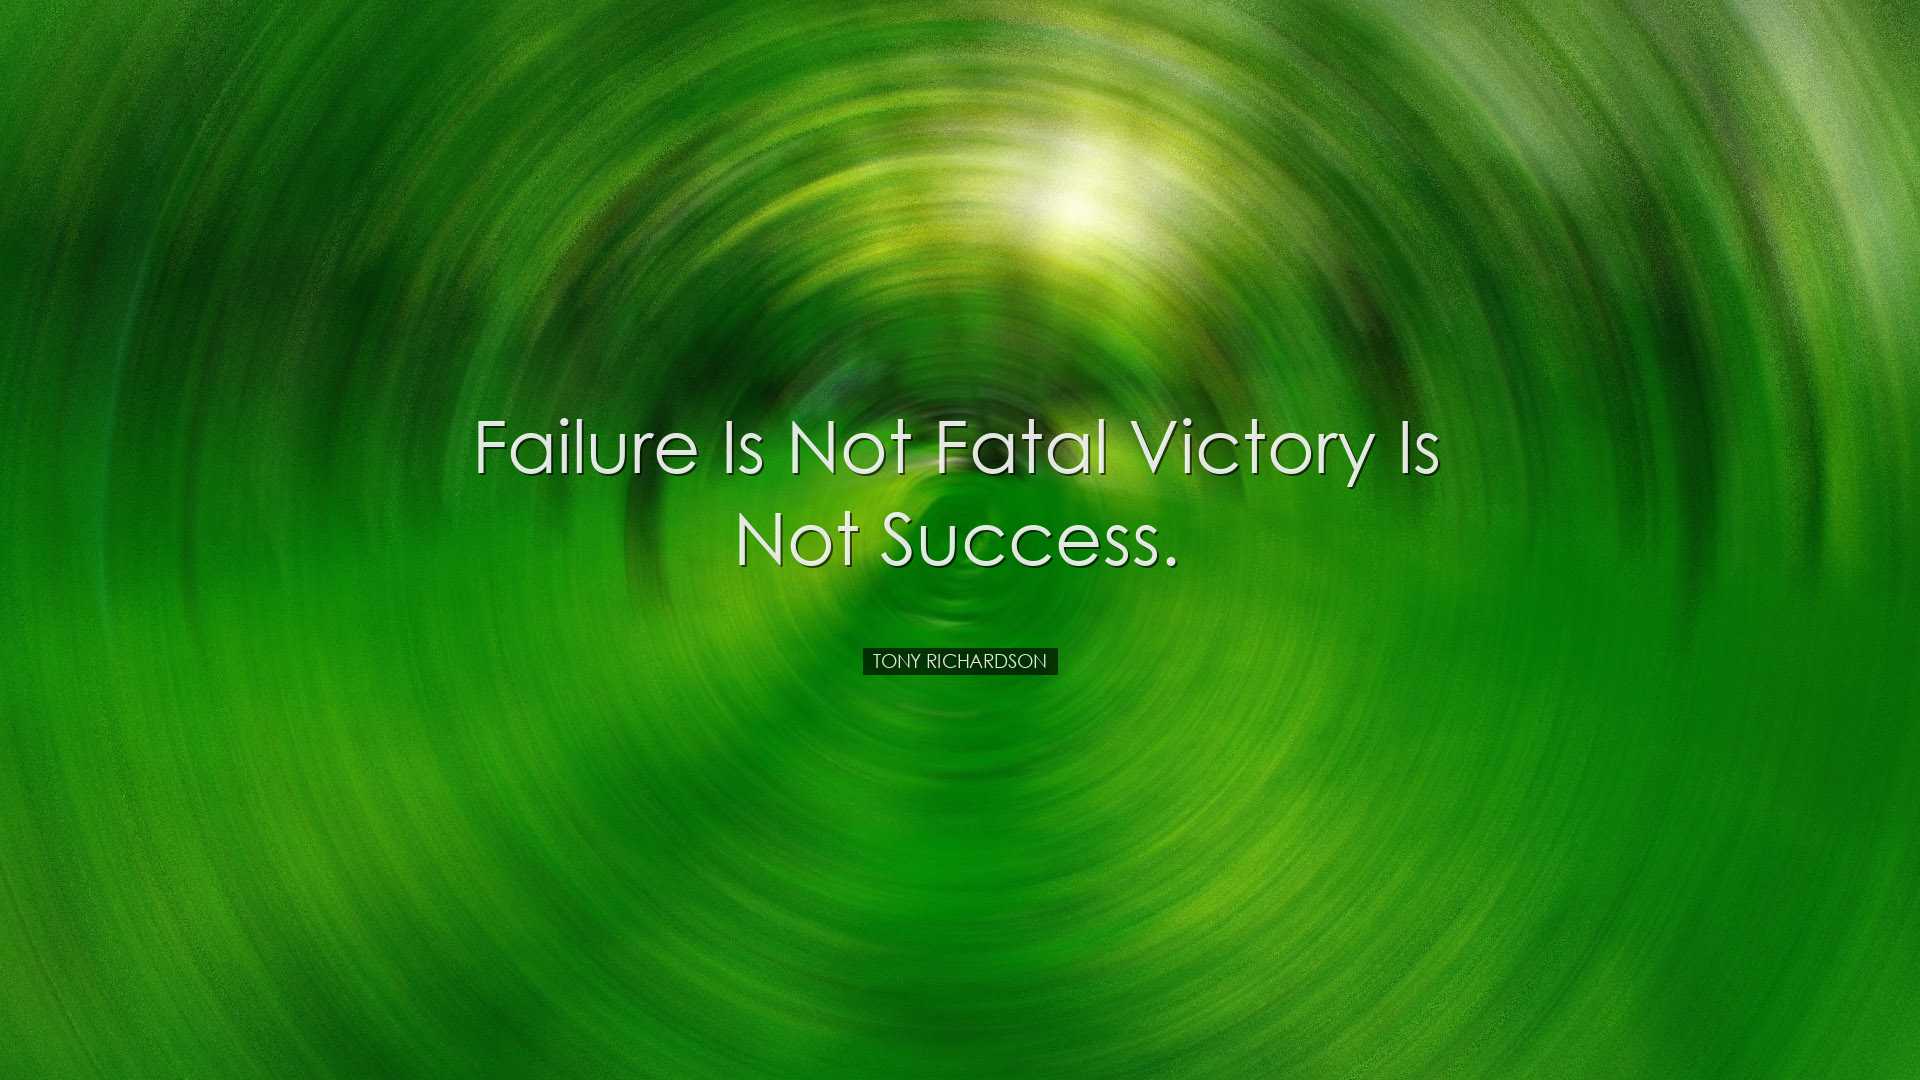 Failure is not fatal victory is not success. - Tony Richardson